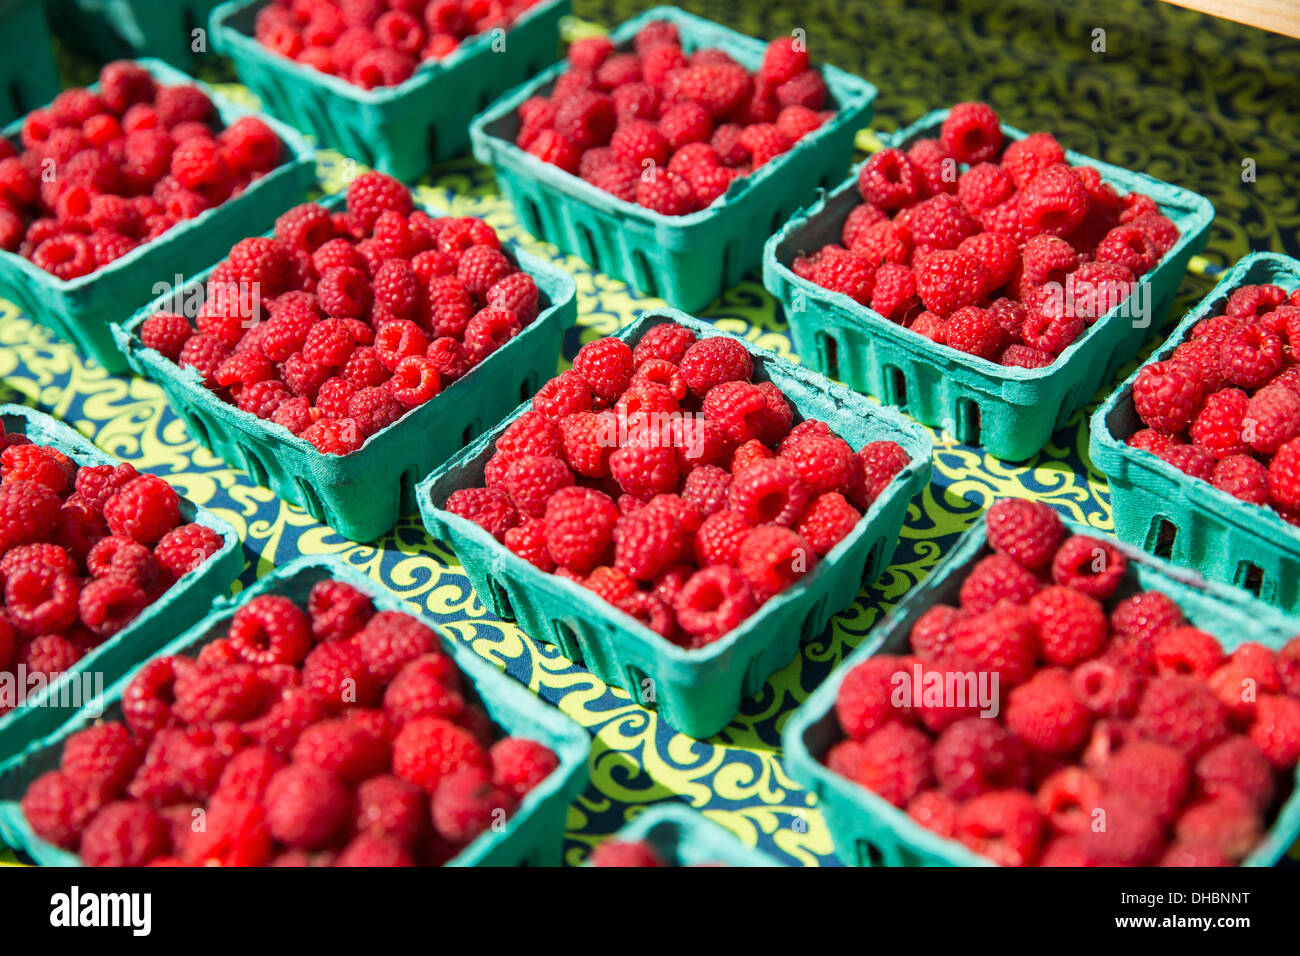 A farm stand, with displays of punnets of fresh berry fruits. Raspberries Stock Photo